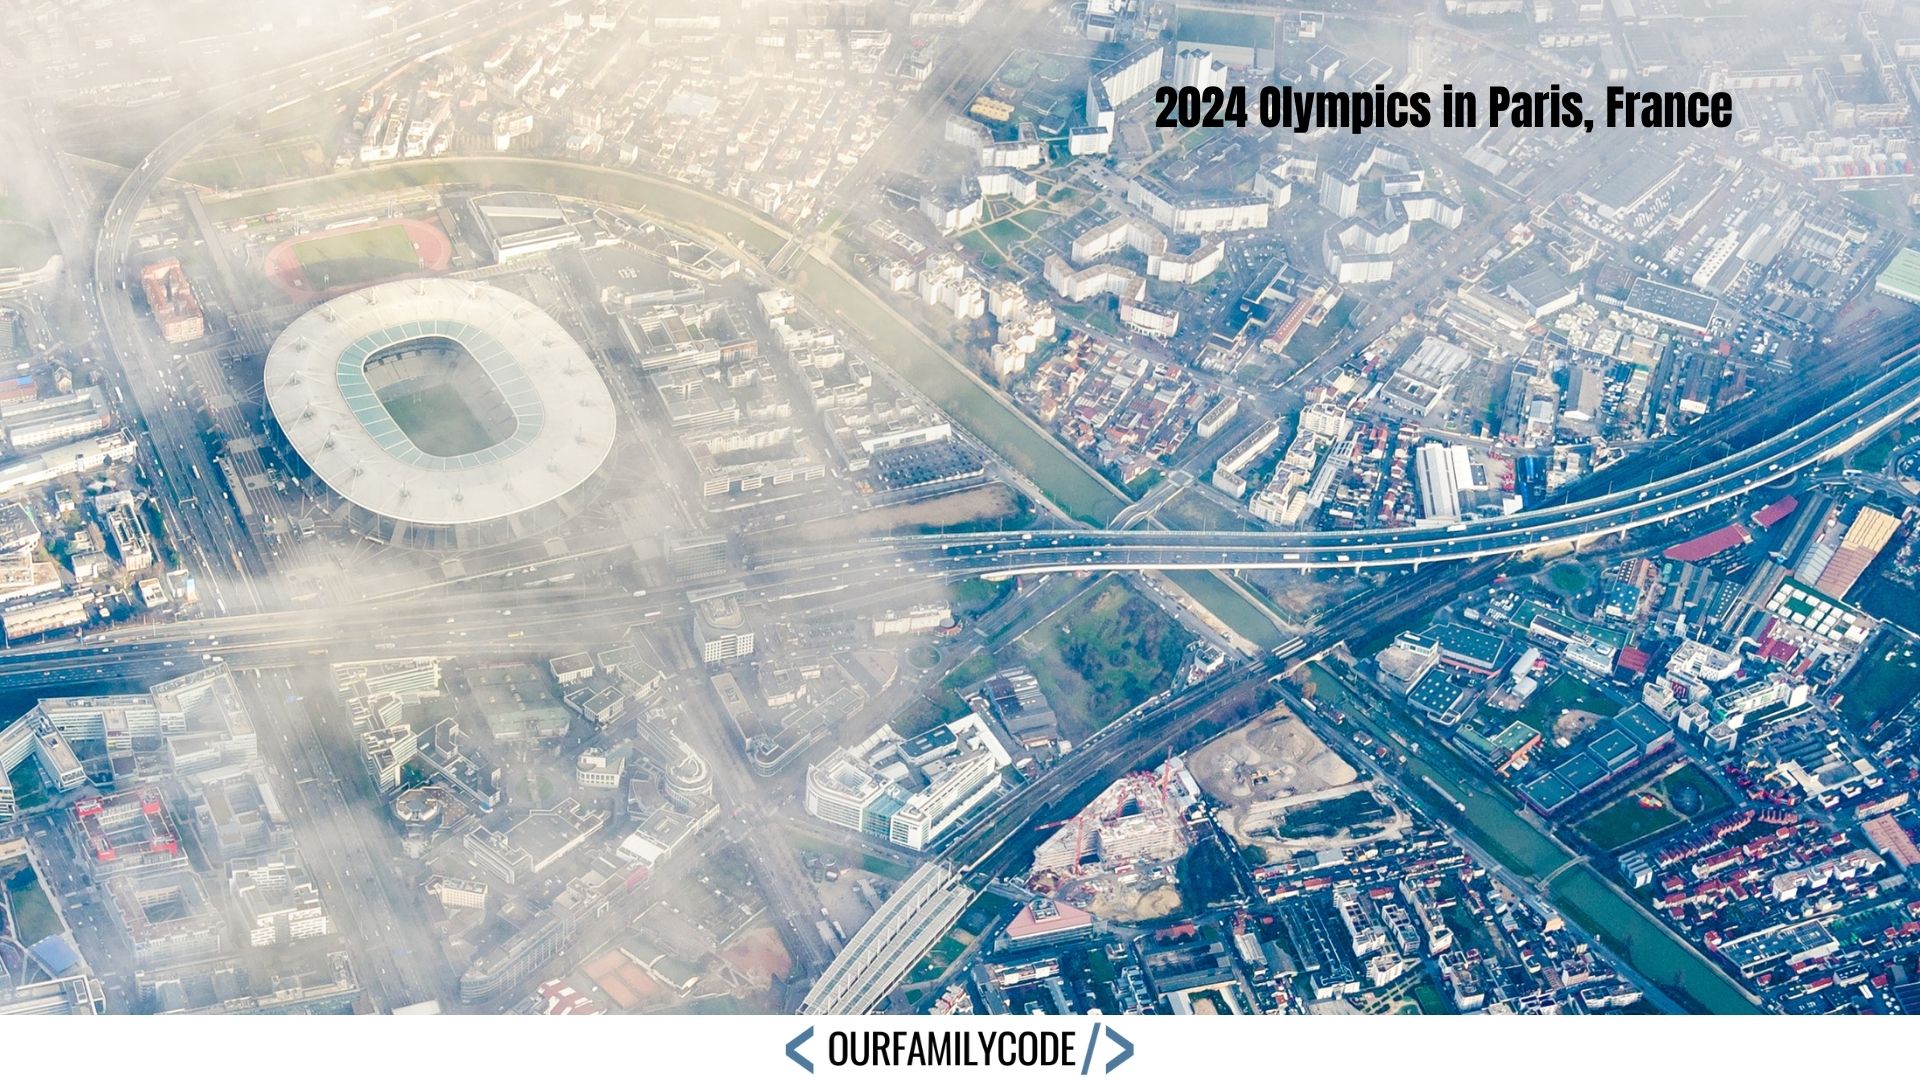 An aerial picture of Saint-Denis, France and the Stade de France that will be used for the Olympic Games in 2024.